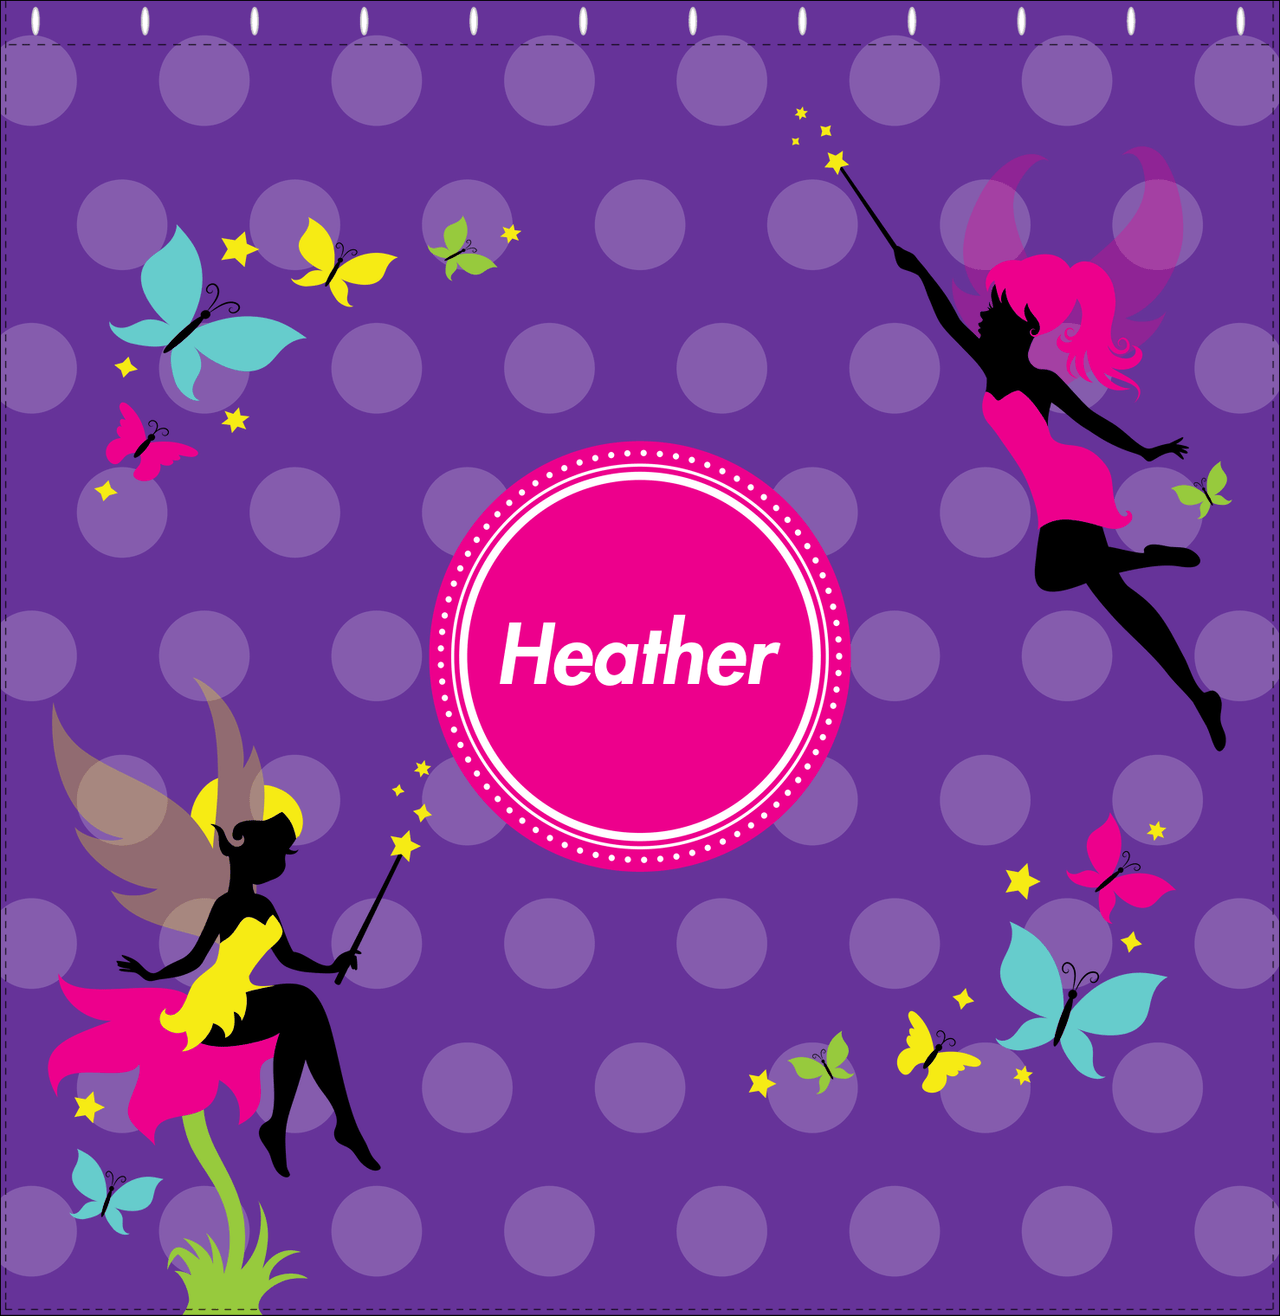 Personalized Fairy Shower Curtain IX - Purple Background with Polka Dots - Decorate View